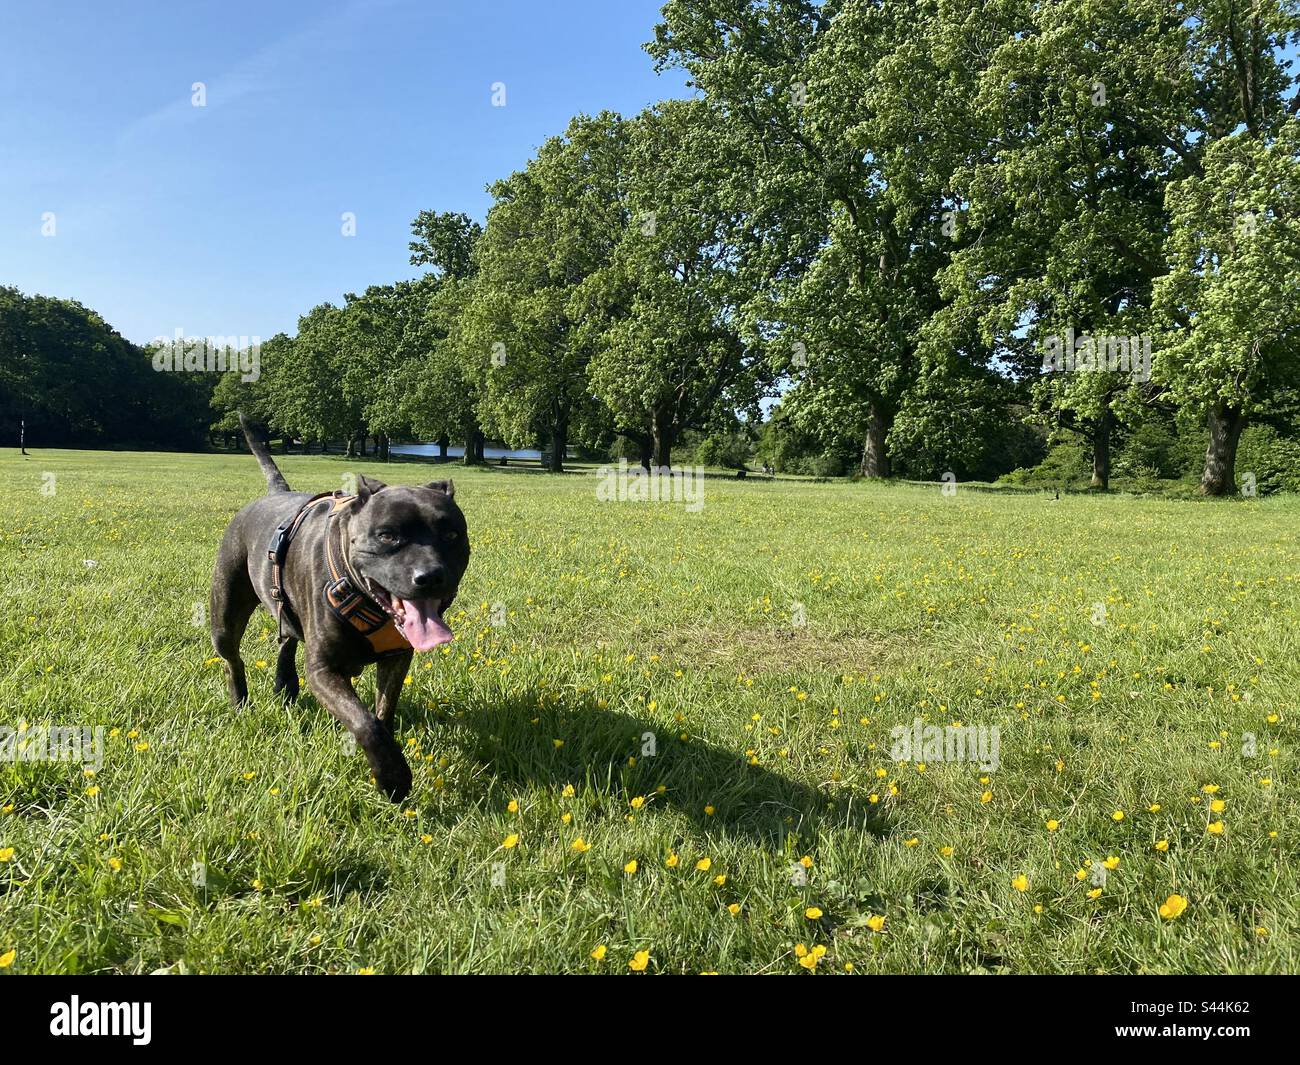 Running Staffordshire bull terrier in a field on a bright sunny blue sky day Stock Photo